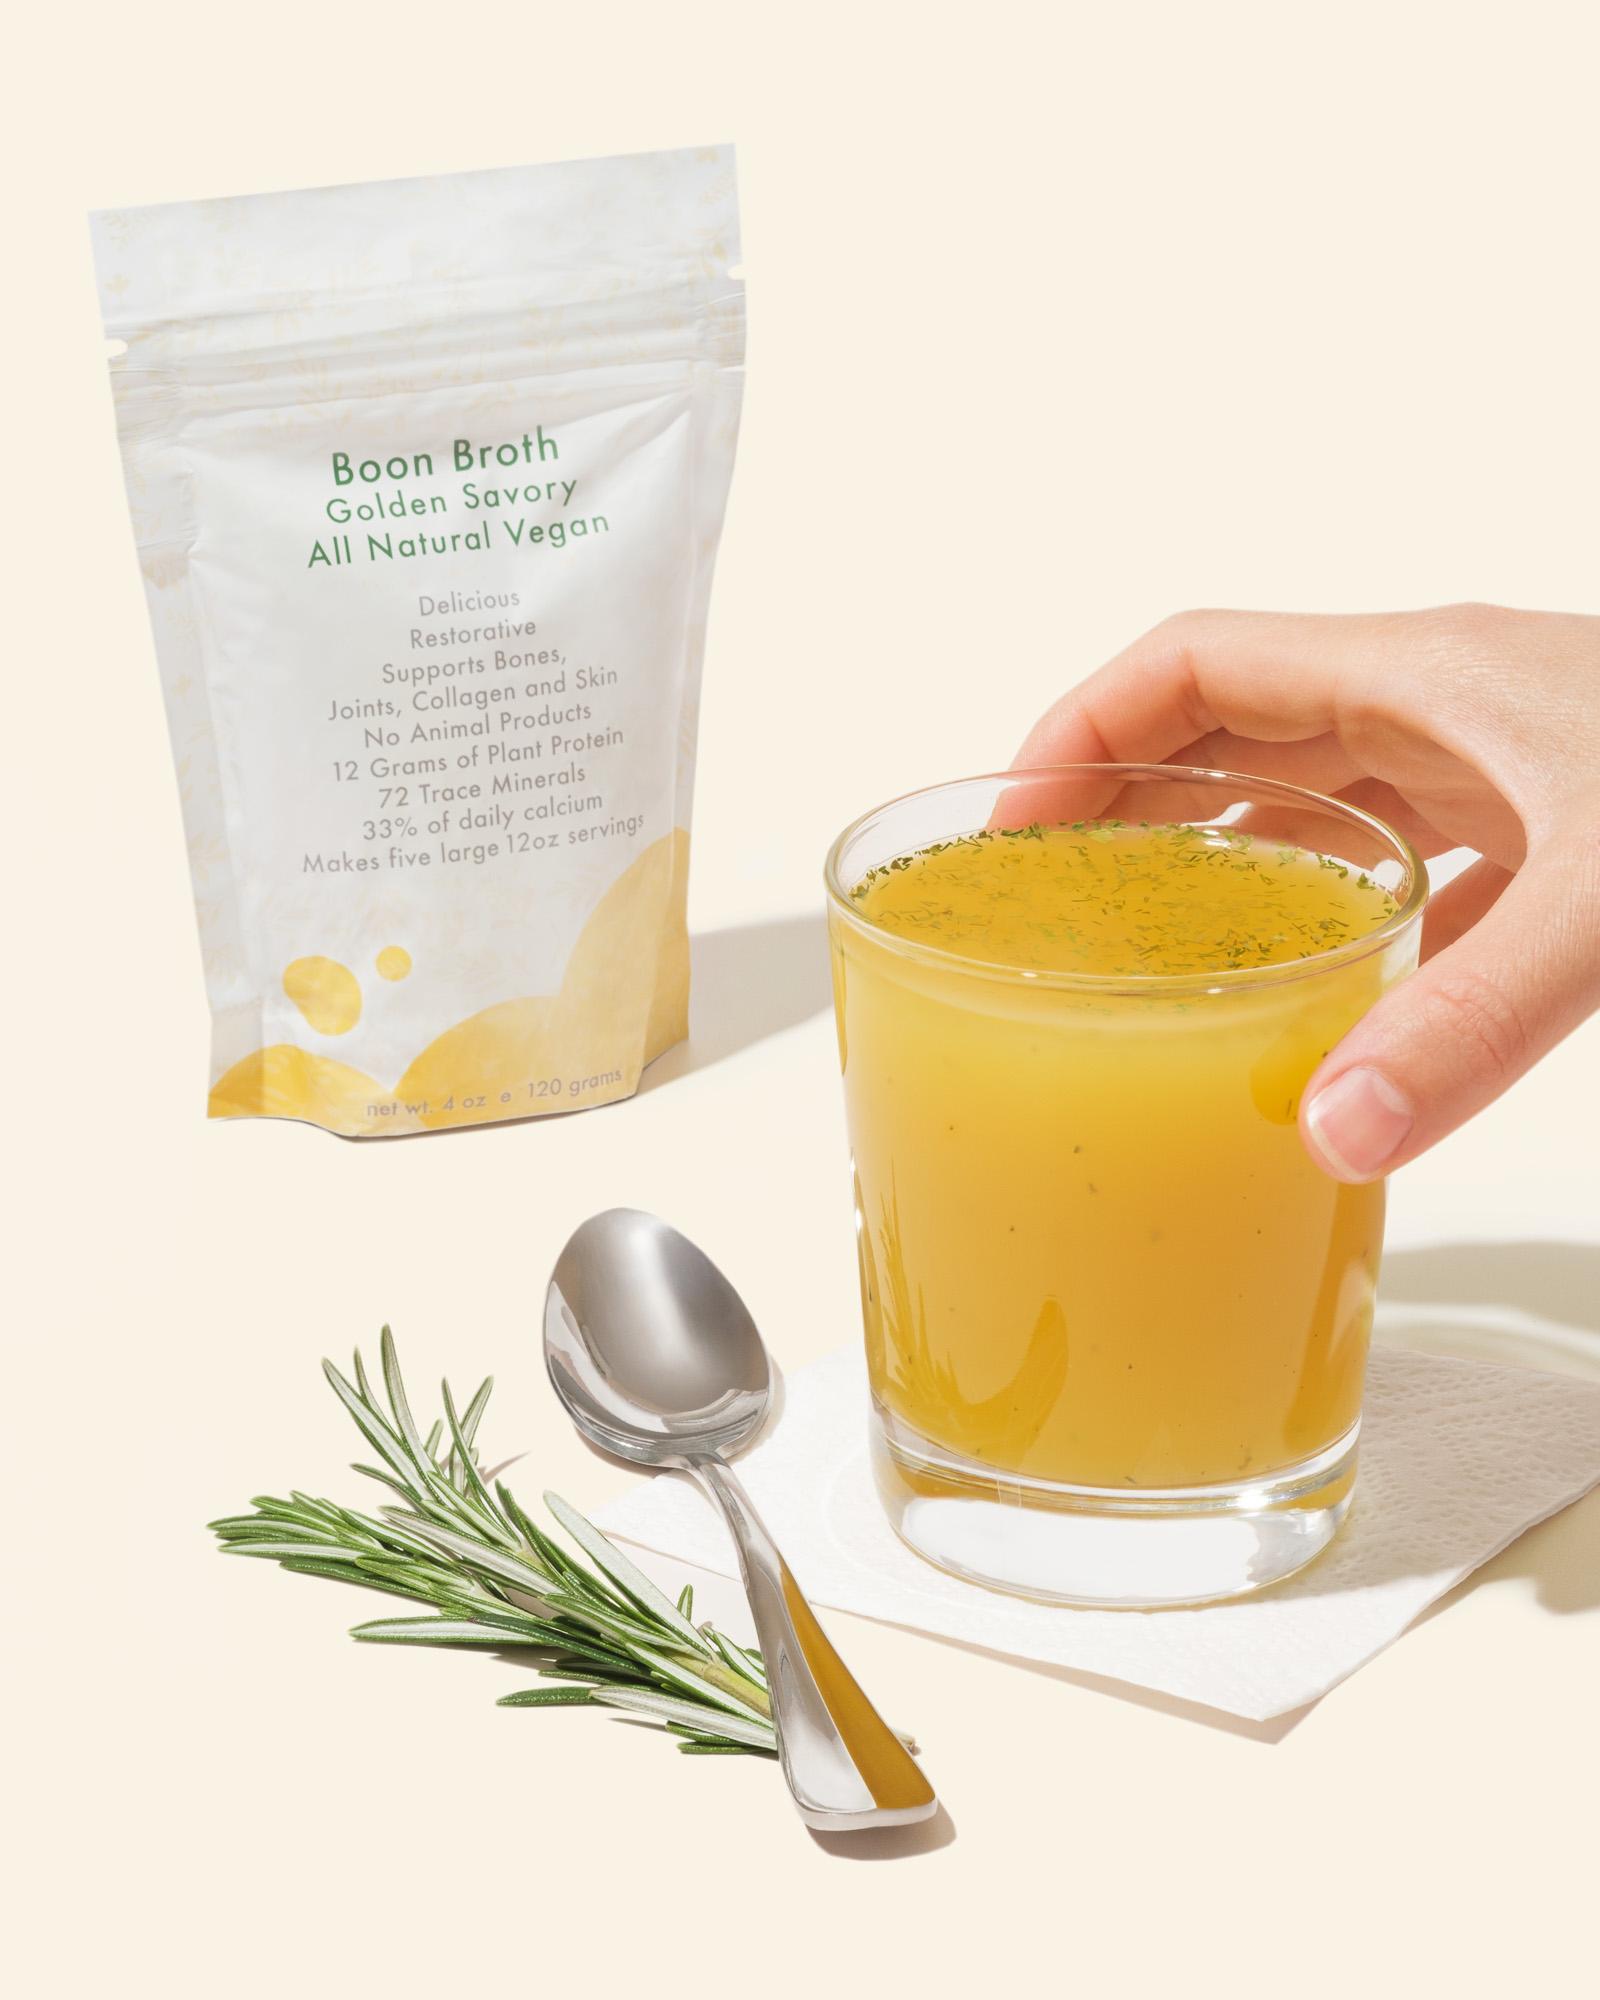 All-Natural Soup Supplement For Dogs & Cats: Learn All About Vegan Bone Broth